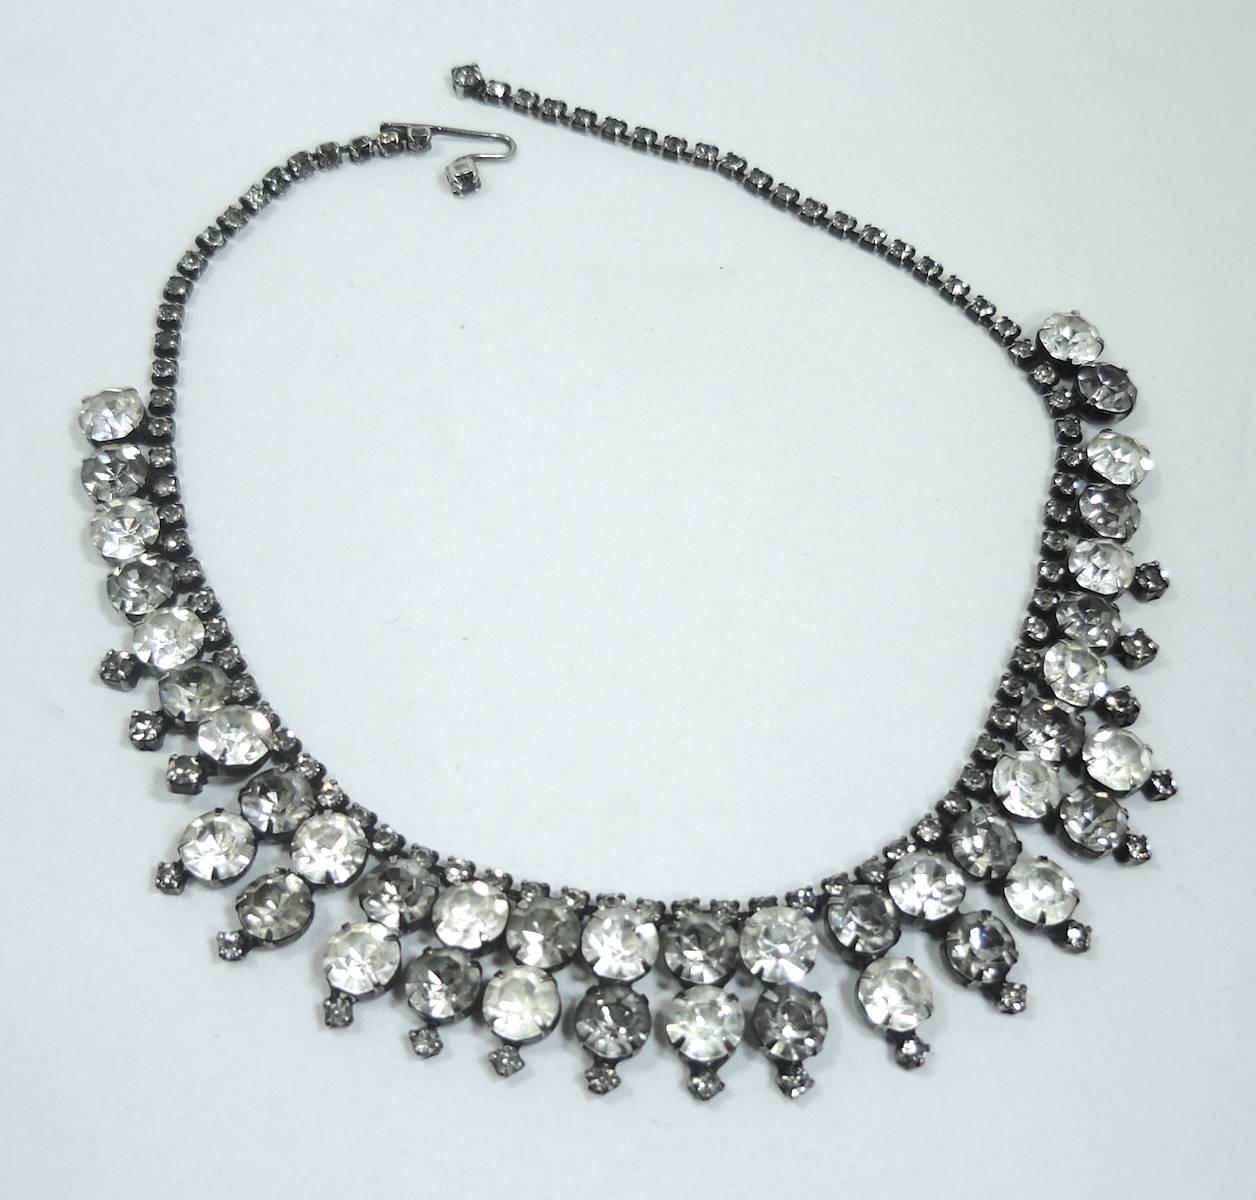 This fabulous necklace was designed by Kramer and has clear rhinestones alternating with a darker grayish rhinestone. The centerpiece has a second row of rhinestones. The second row drapes with smaller rhinestones at the tips. It has a pewter tone